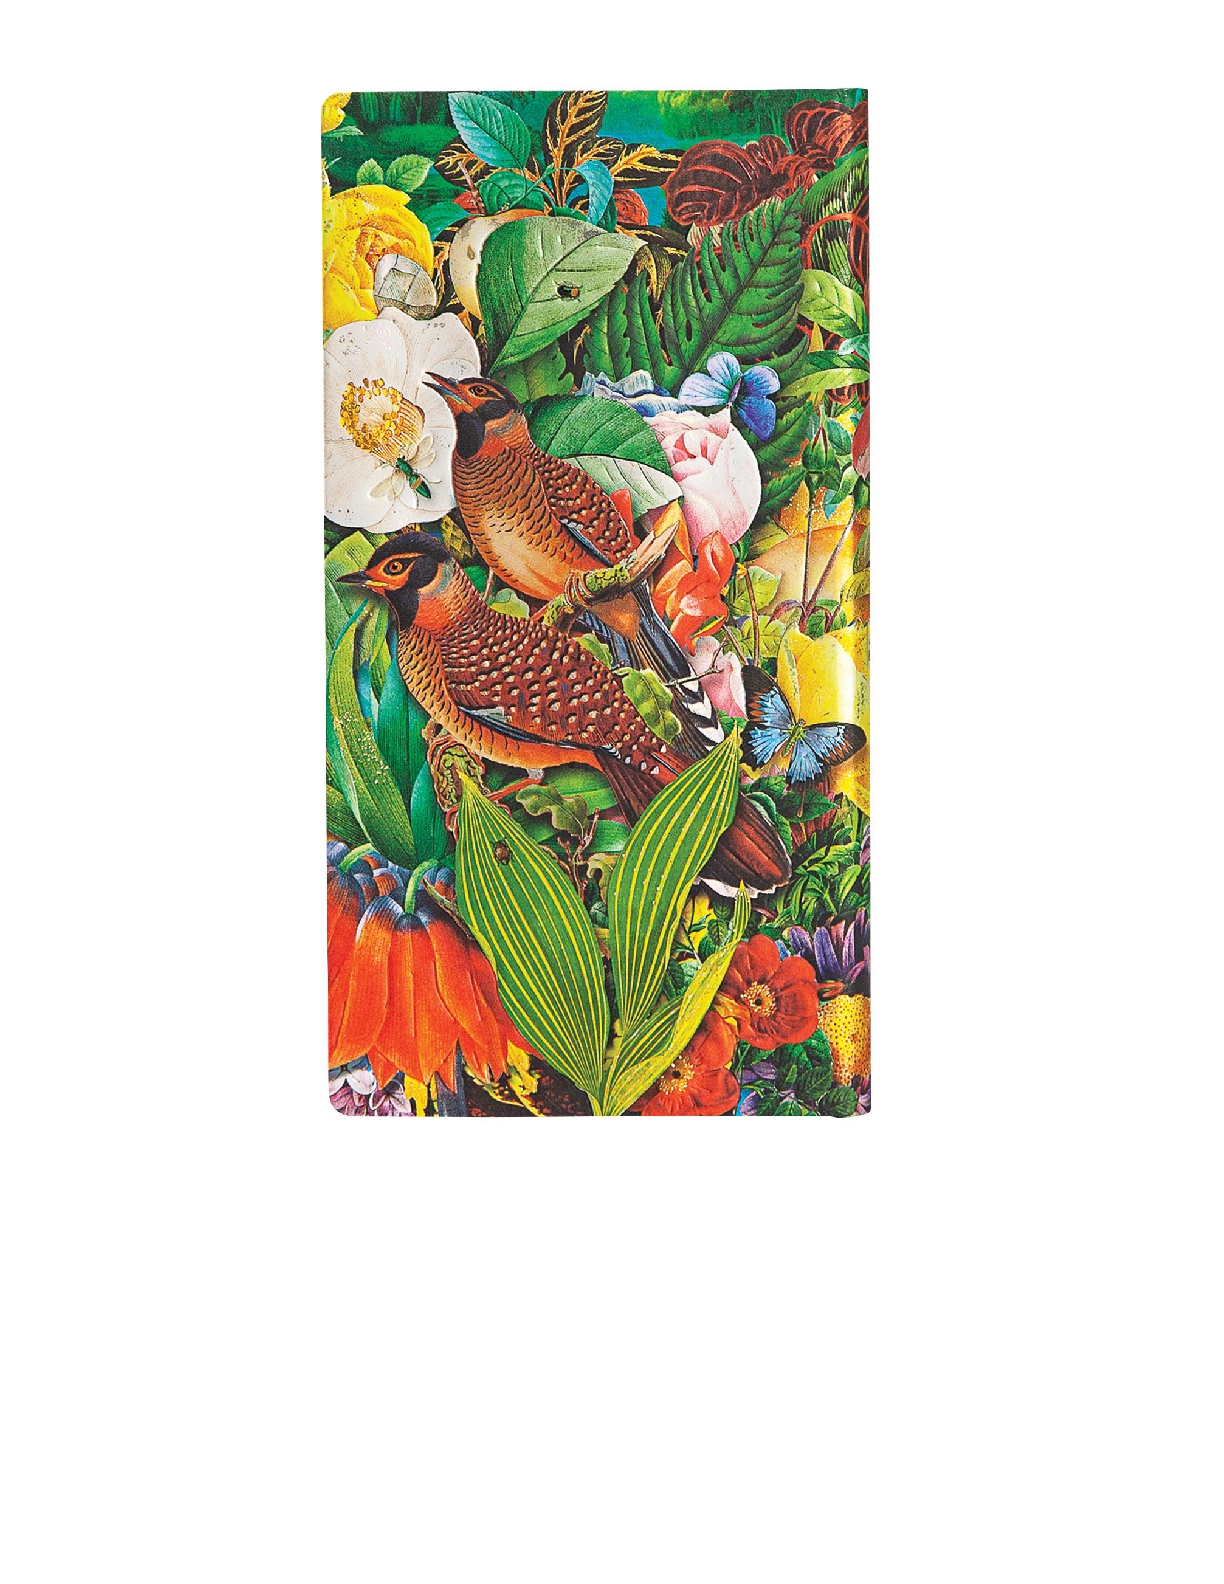 Moon Garden, Nature Montages, Hardcover, Slim, Lined, Elastic Band Closure, 176 Pg, 85 GSM